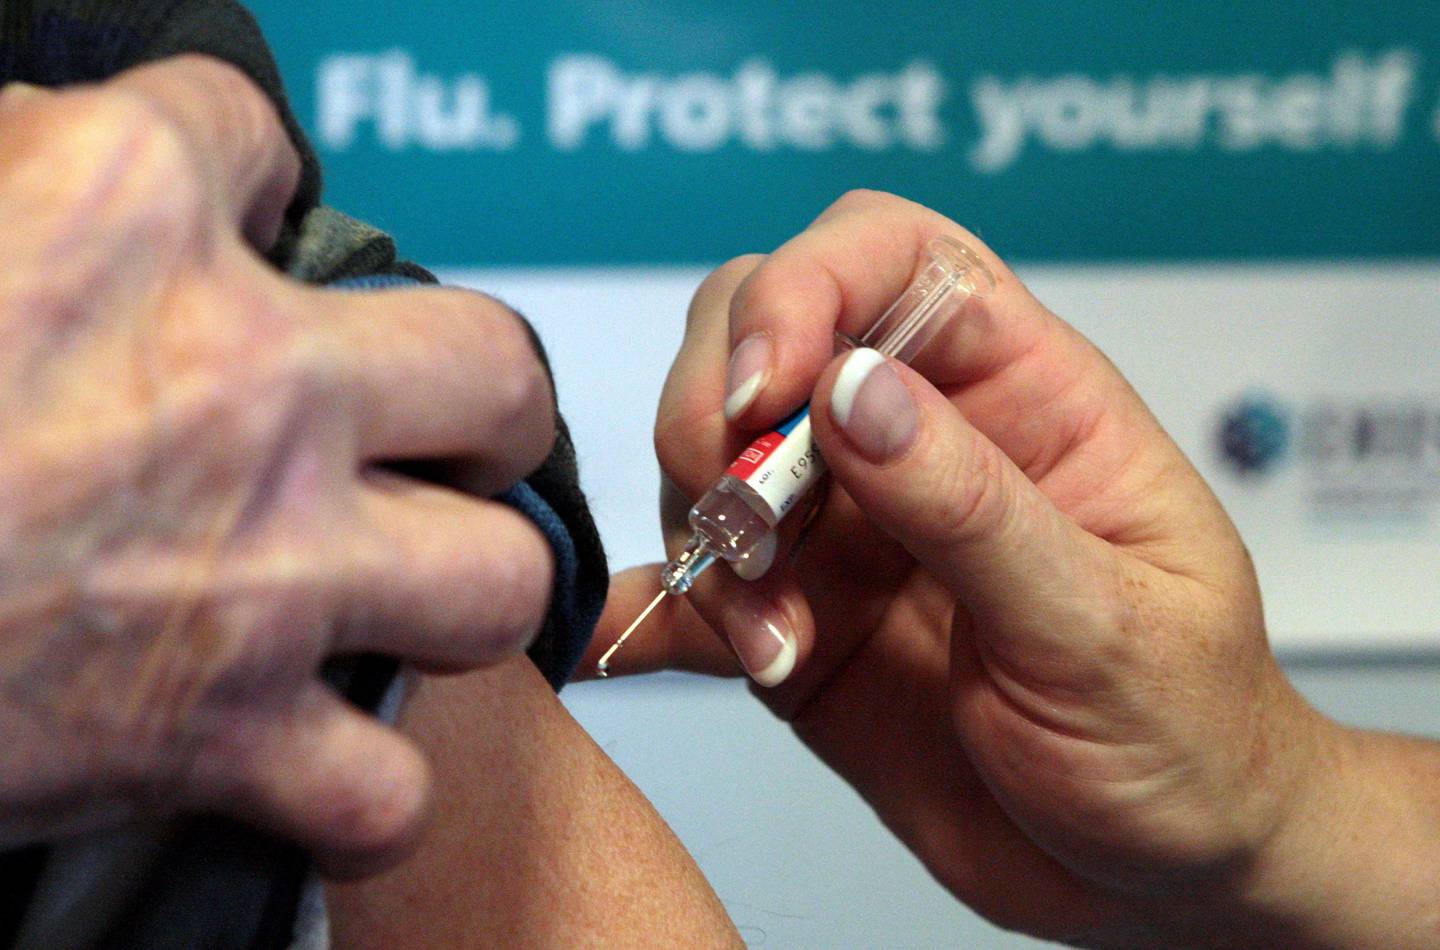 The NHS has continued to push ahead with its biggest ever flu campaign